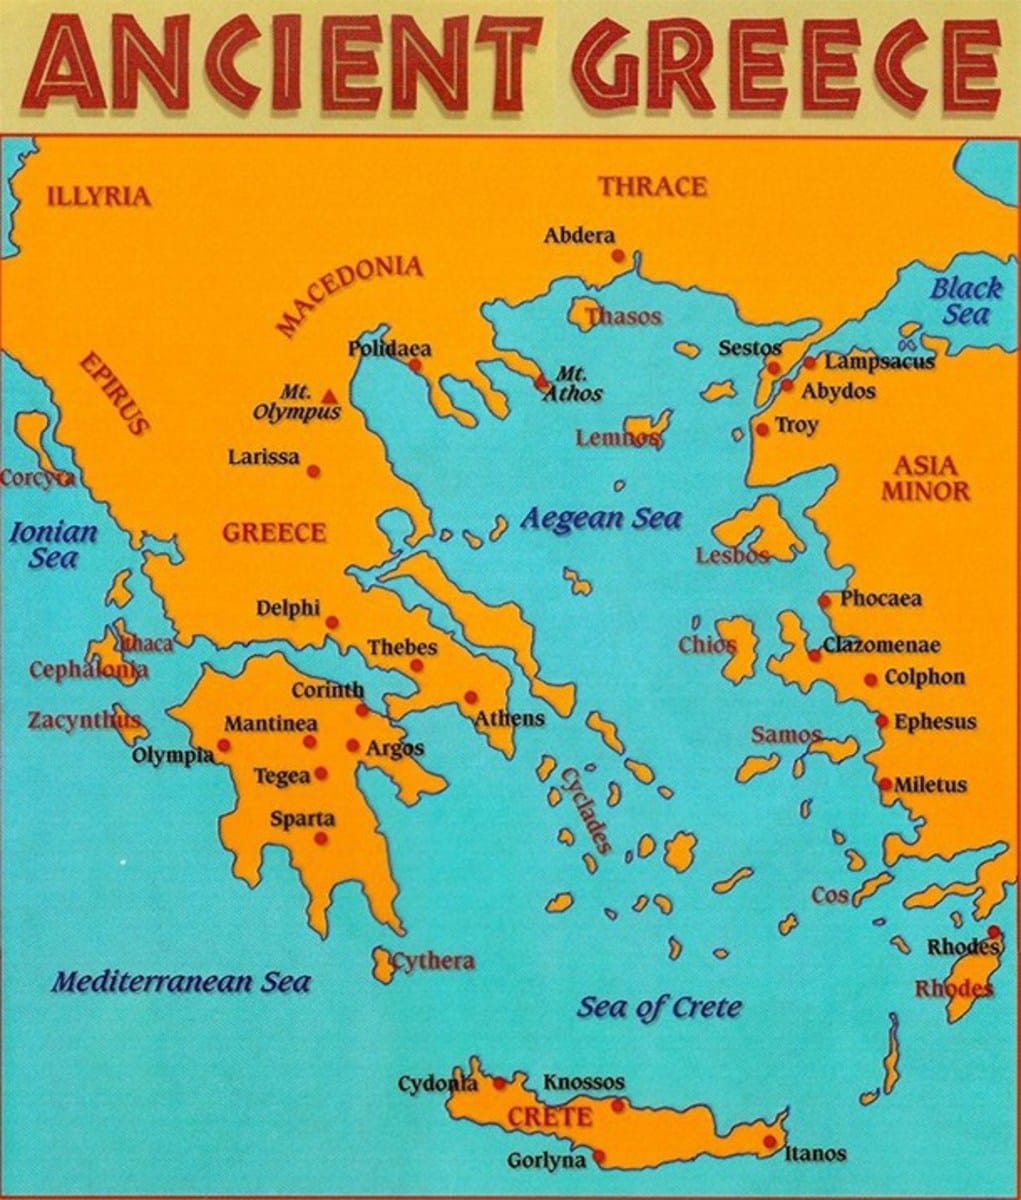 Ancient Greece during the Mycenaean